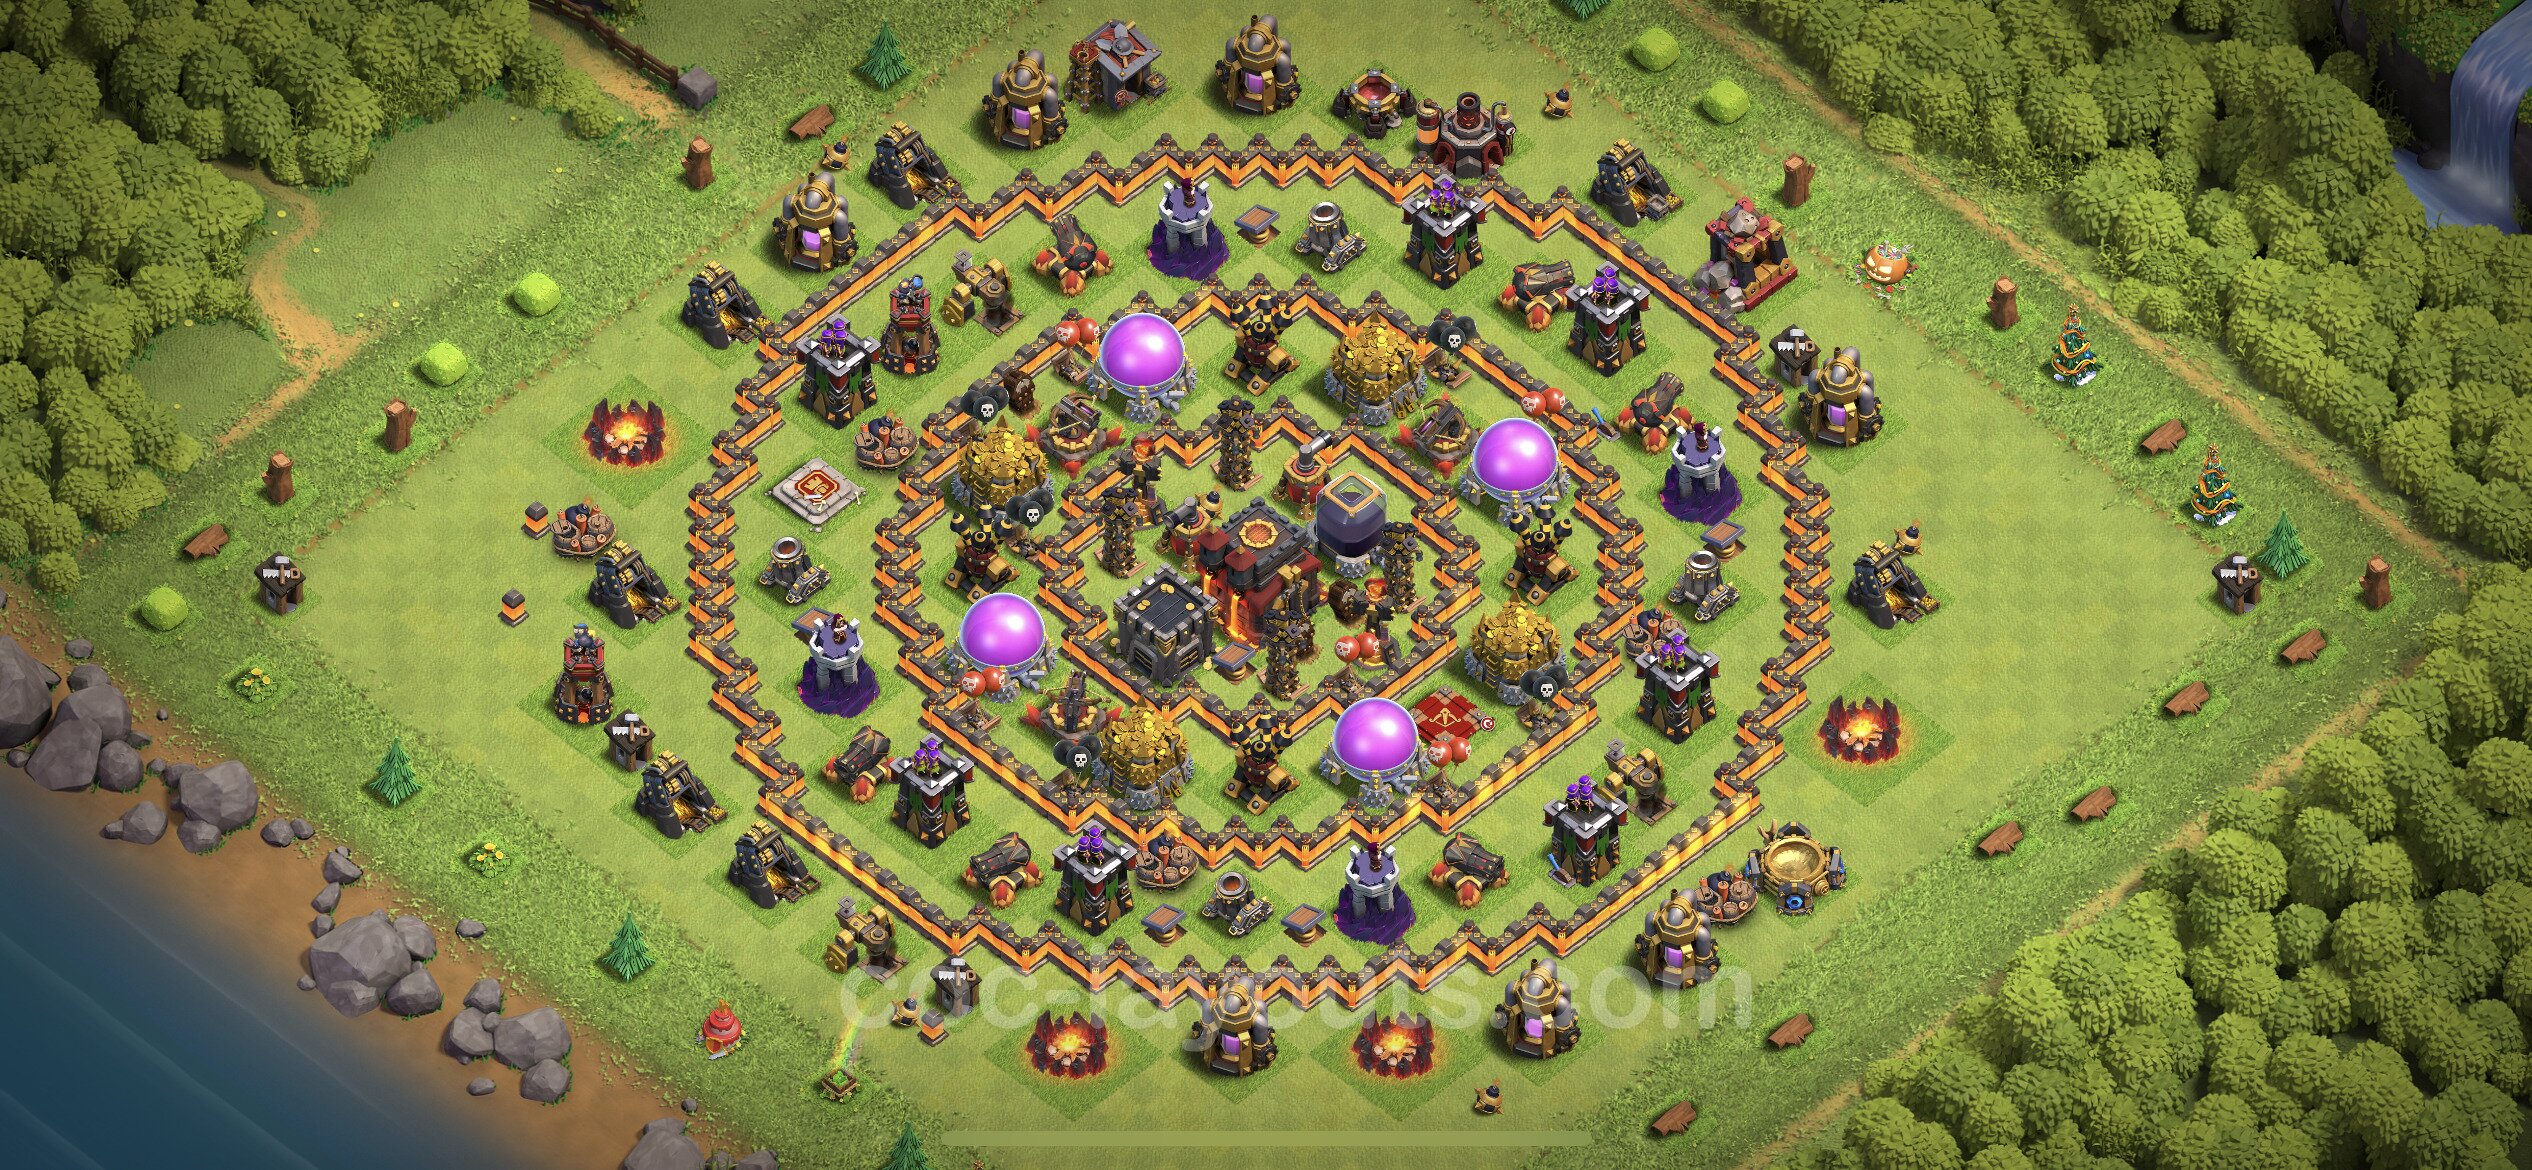 Farming Base TH10 with Link, Anti Everything, Hybrid - Clash of Clans 202.....